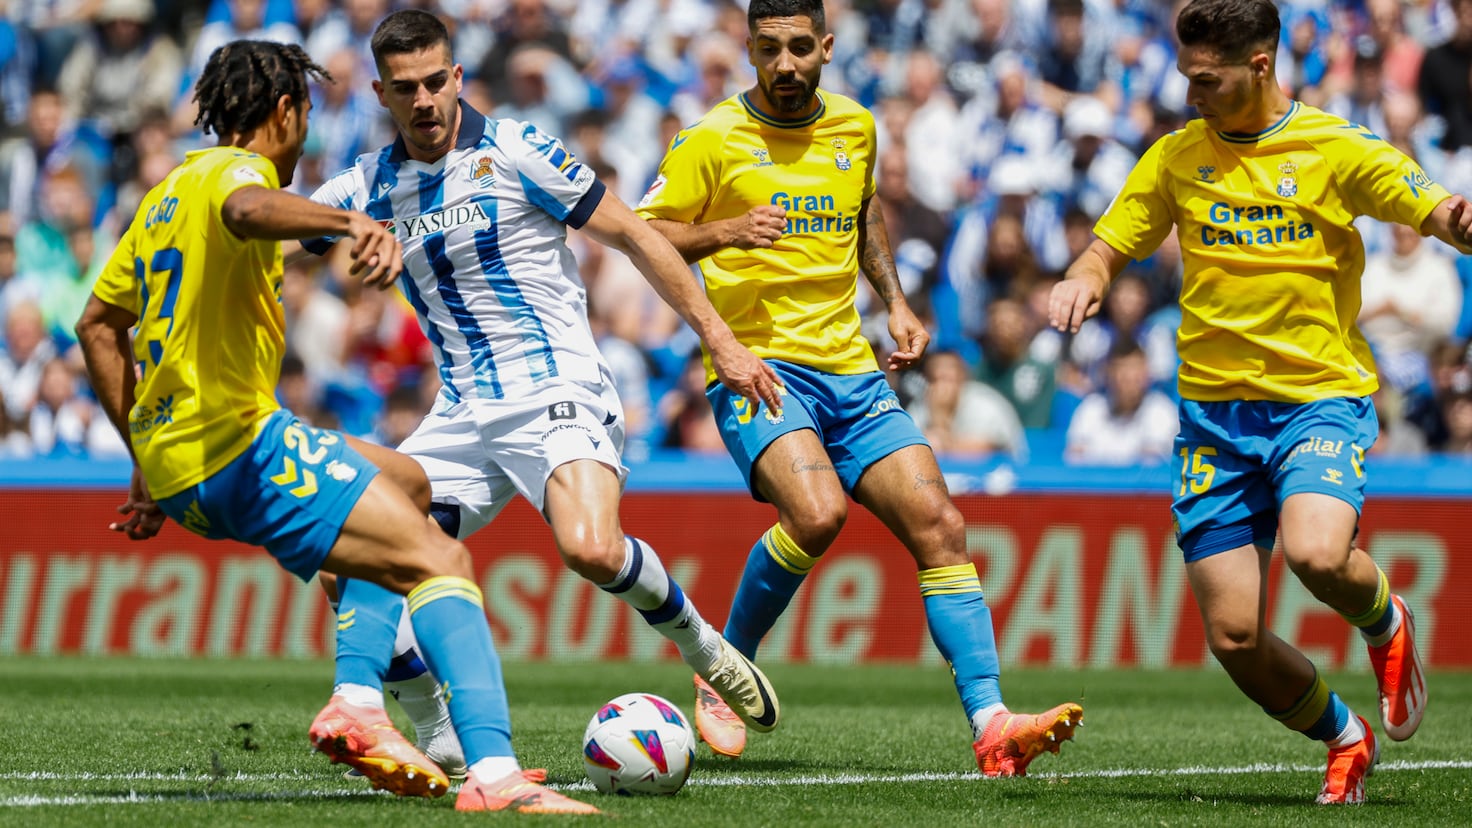 Unrelenting Drought: Las Palmas' Ten-Game Winless Streak Continues Amid Apologies and Frustration